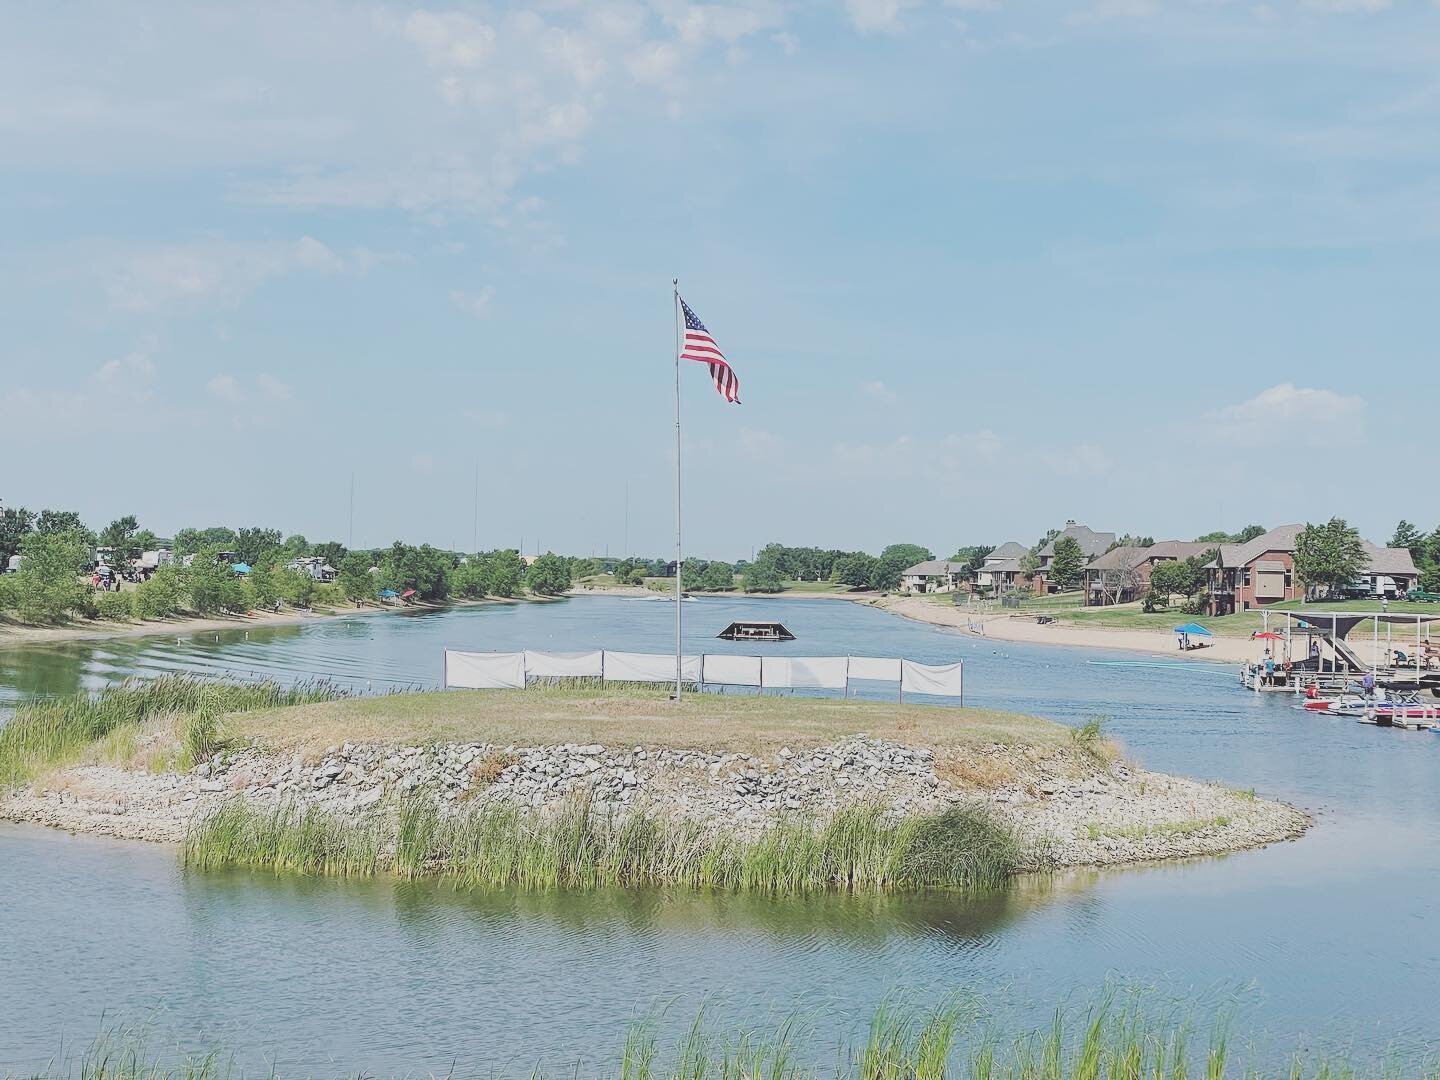 The 2022 US National Waterski Championships are in full swing! Go check out the action and webcast from @waterskibroadcasting. 

@usaws @waterskicompany 

@miaminautique @miaminautiqueboatsforsale @lapointskis @lakemartinwave @skiwithwade_